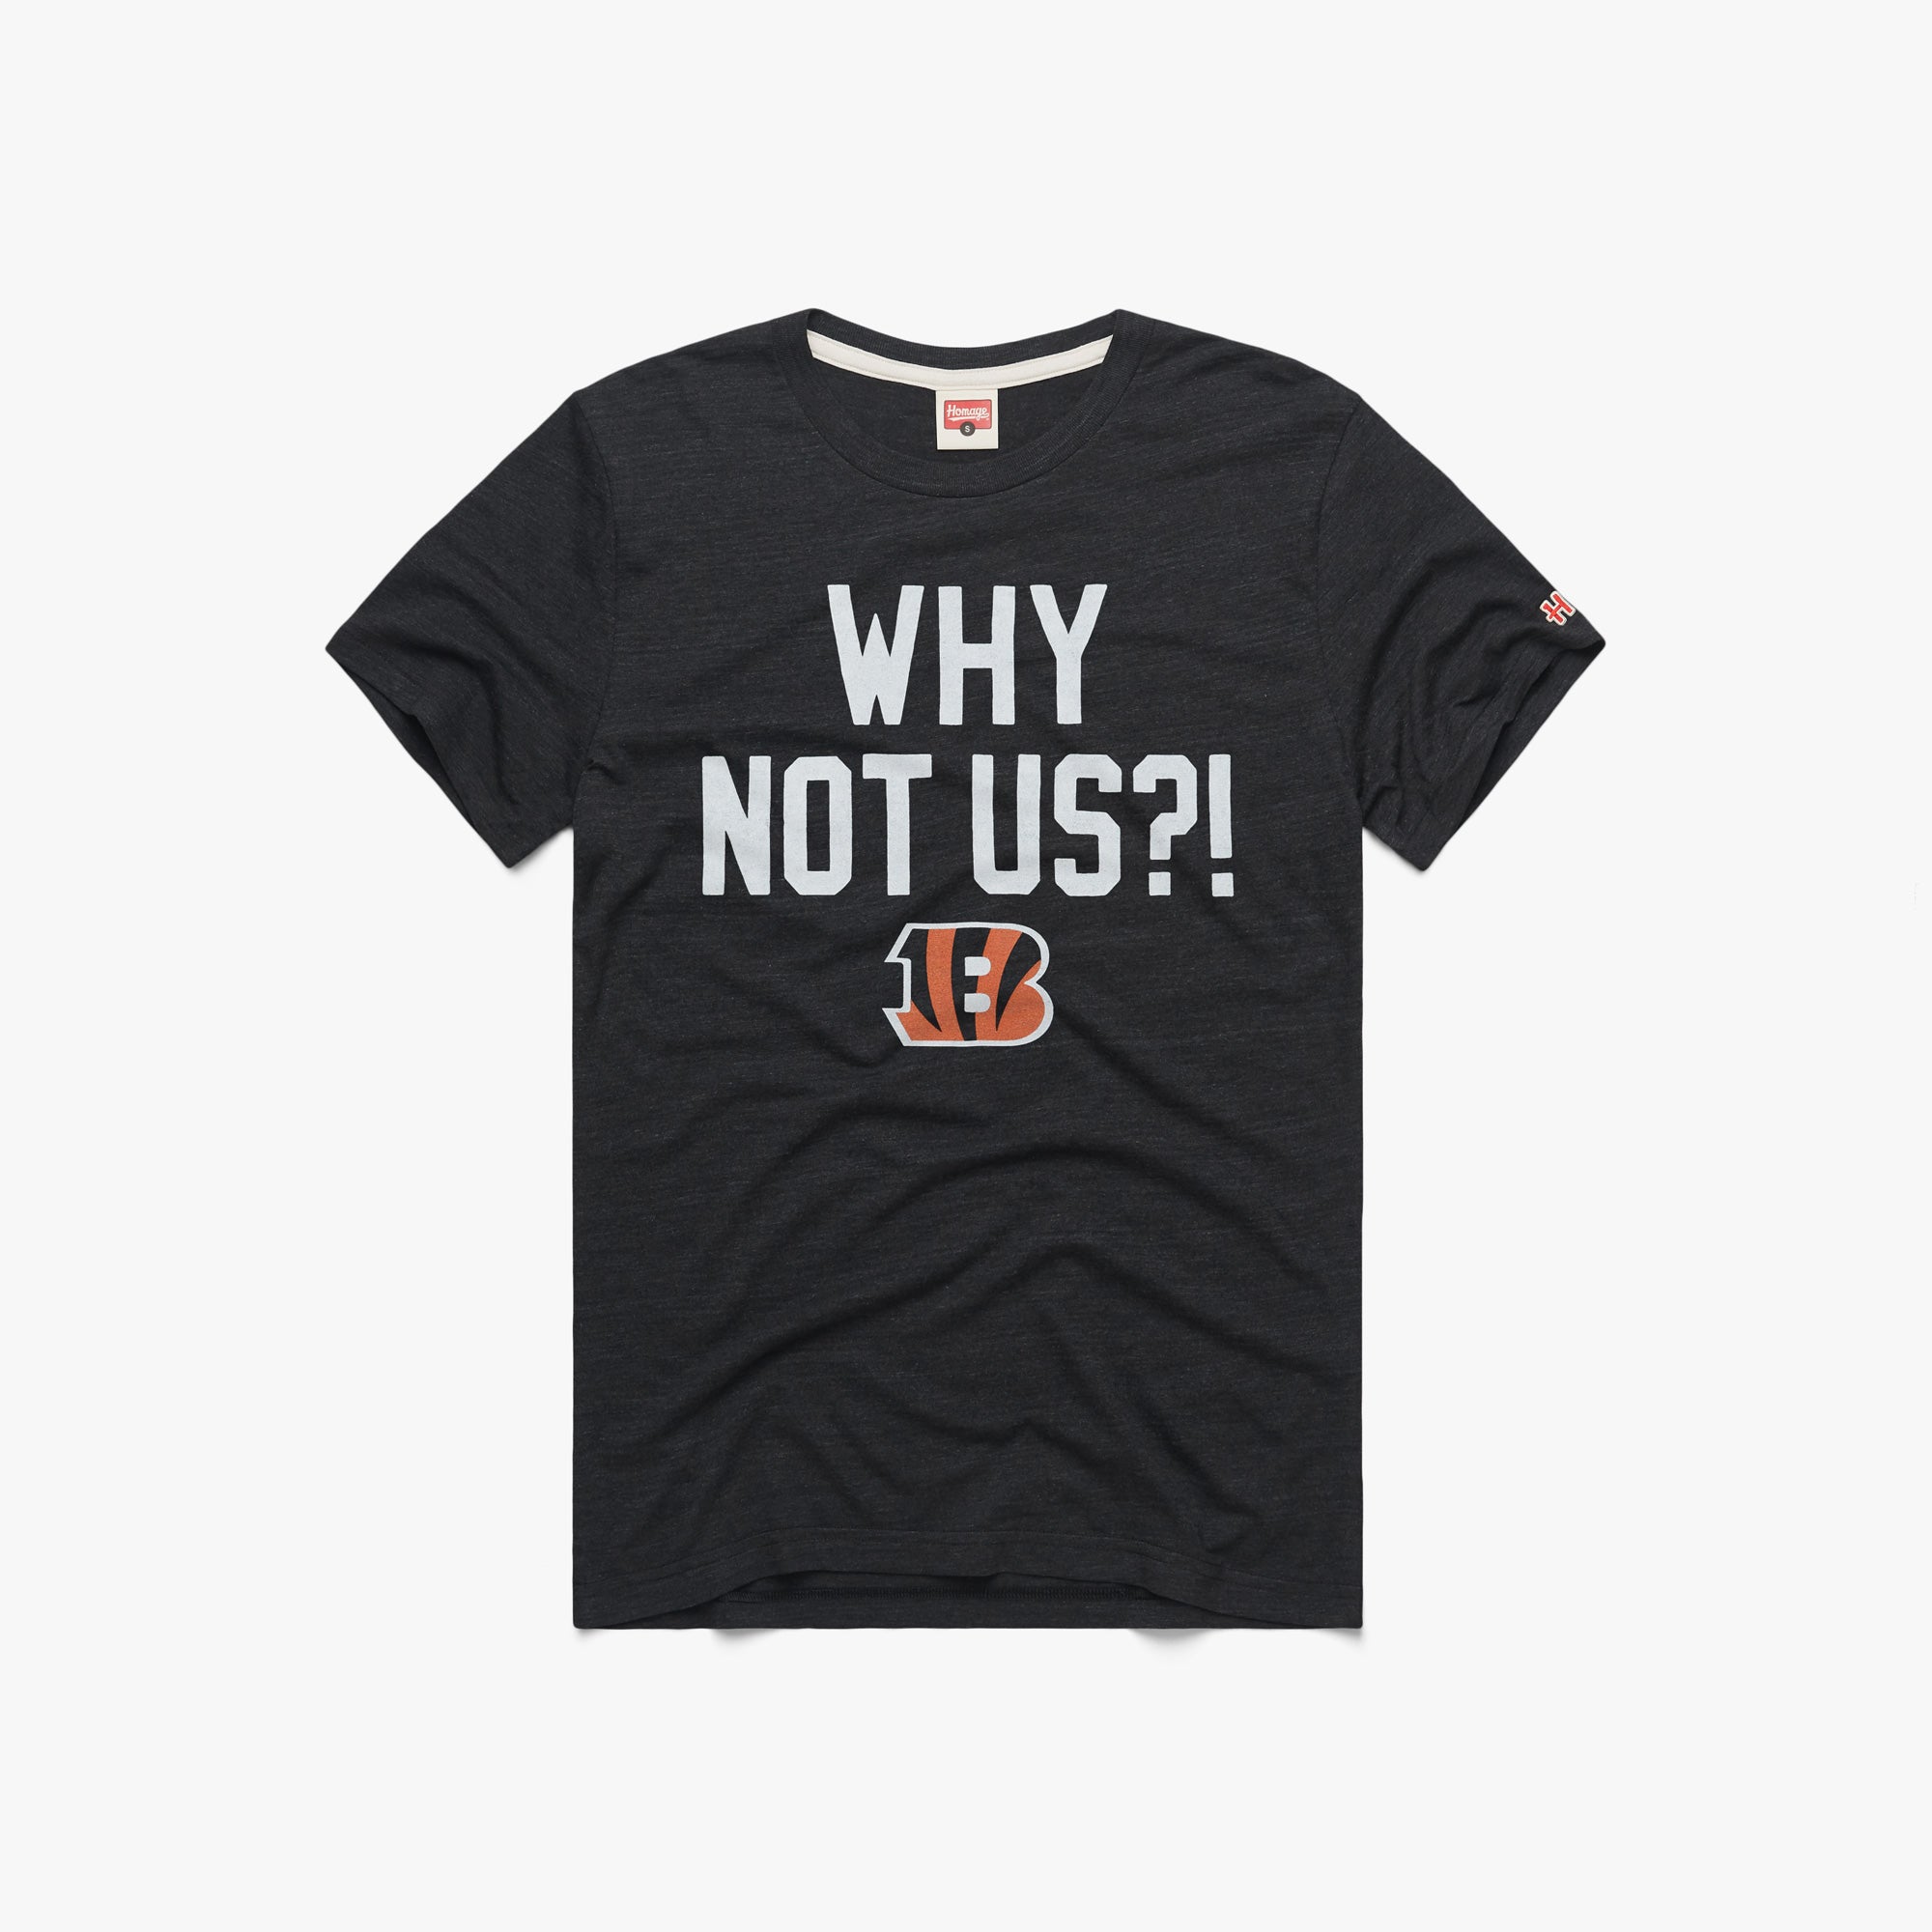 Cincinnati Bengals Why Not Us? T-Shirt from Homage. | Officially Licensed Vintage NFL Apparel from Homage Pro Shop.